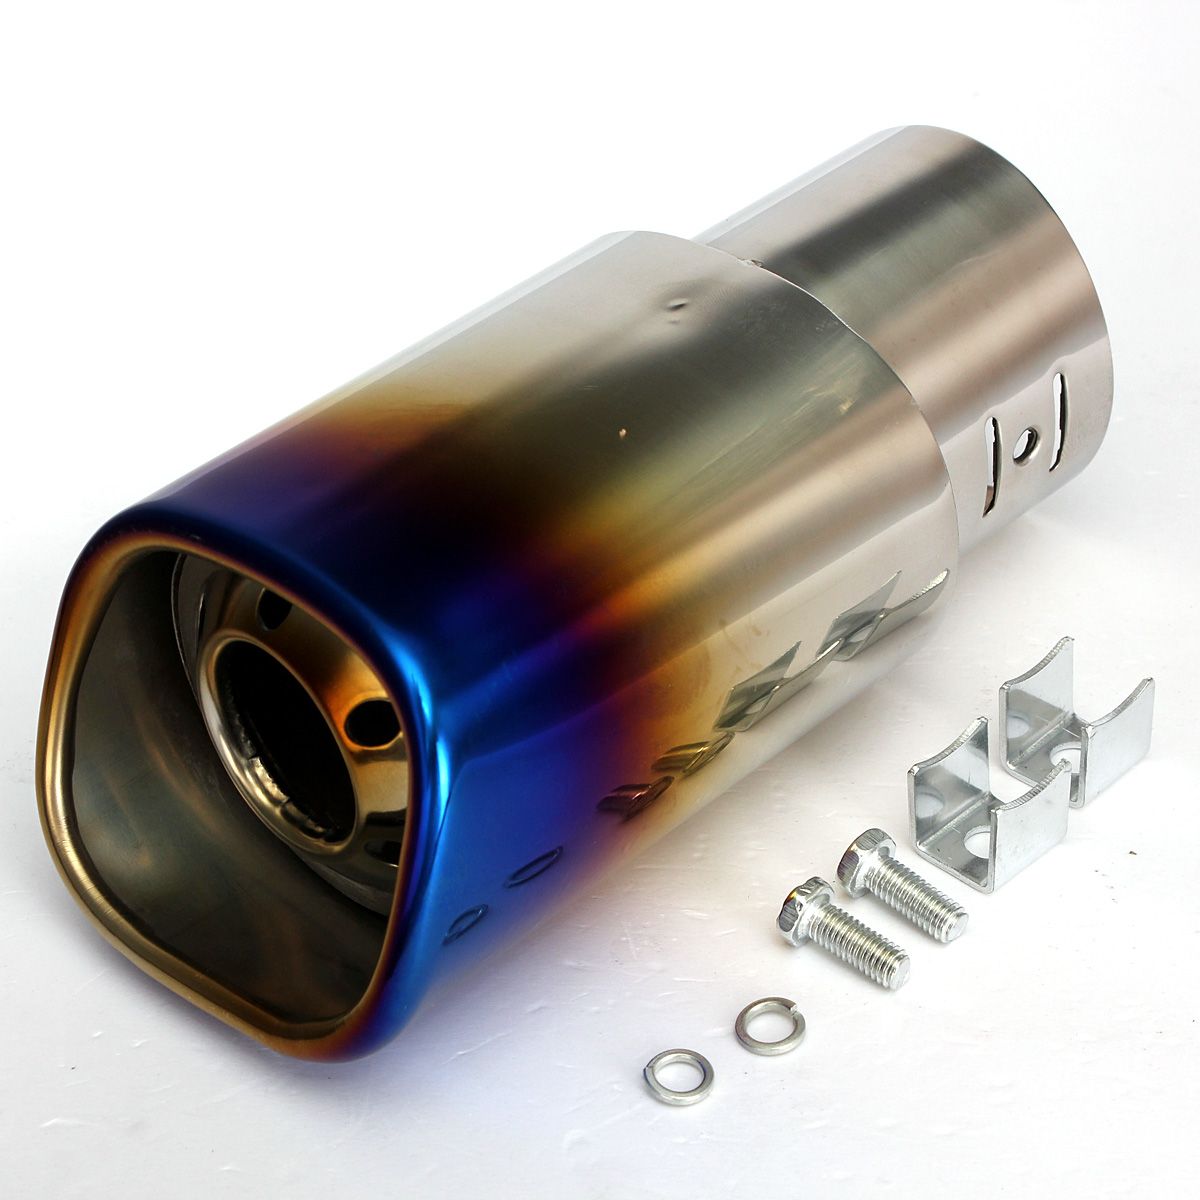 New-Oval-Sport-Chrome-Exhaust-Tailpipe-Muffler-Tip-Trim-End-for-Land-Rover-Sport-1014680